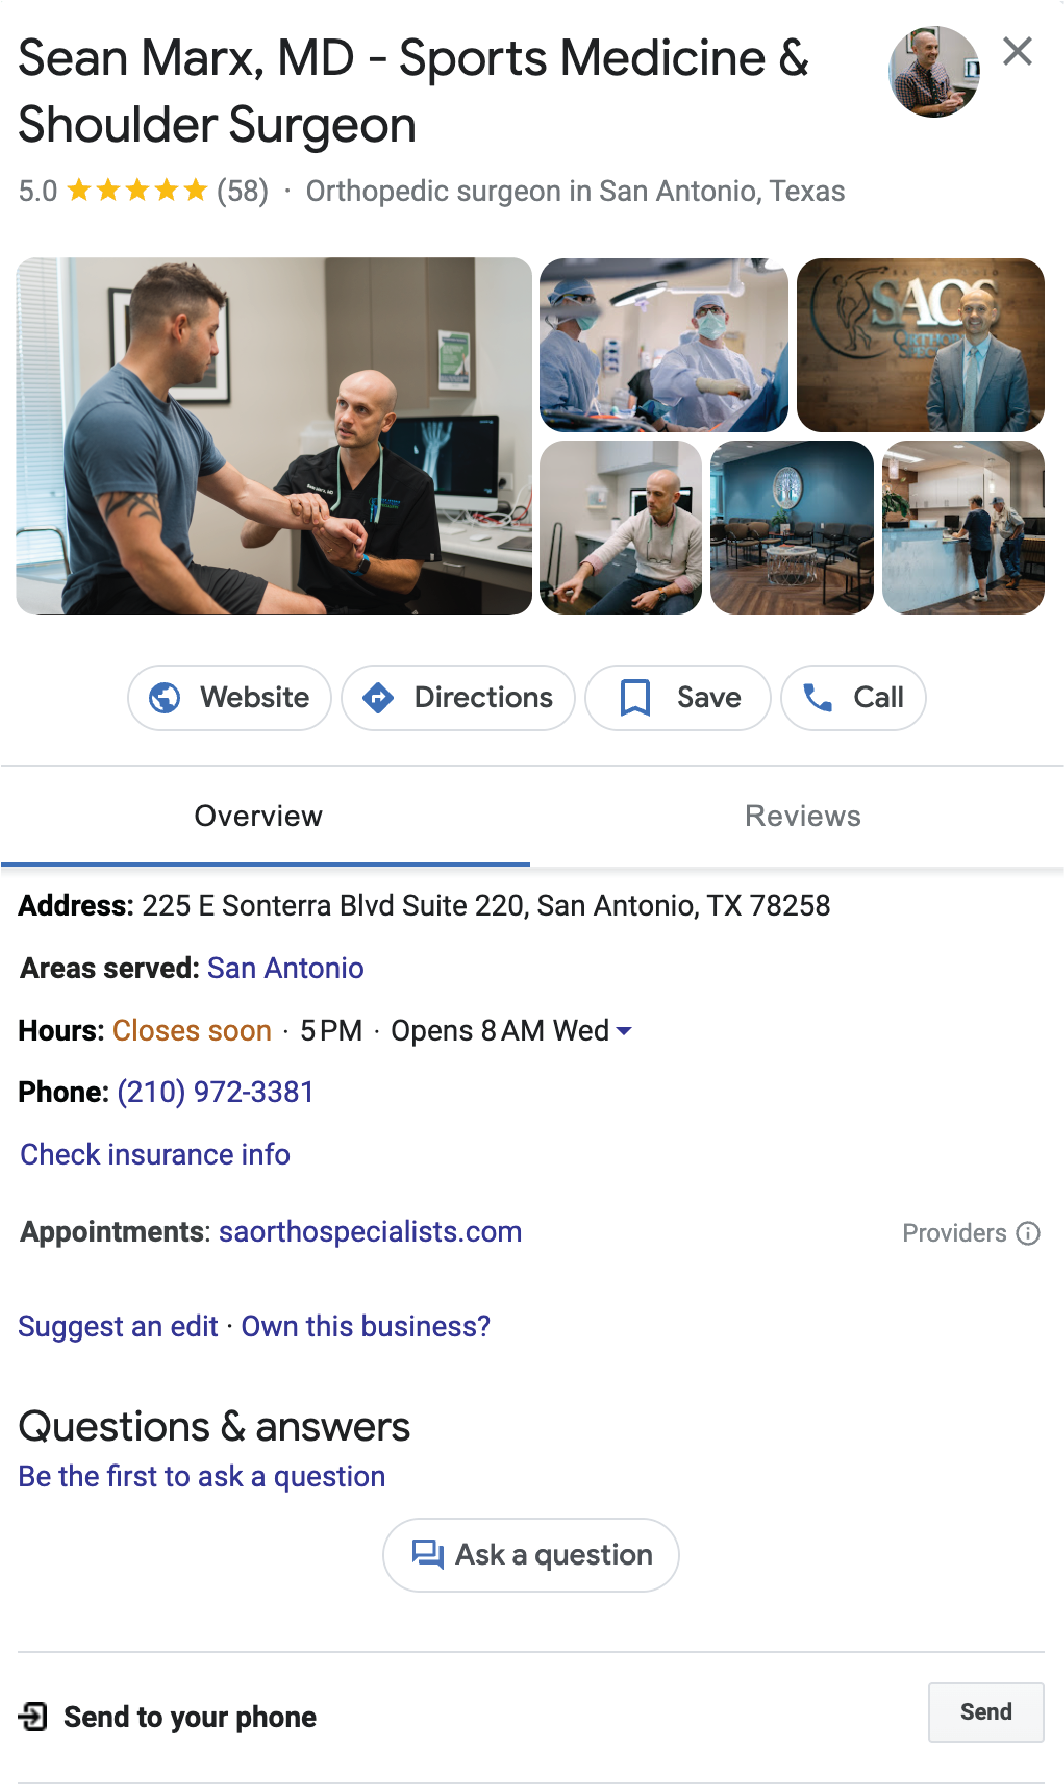 Google Listings For Physicians-06.png